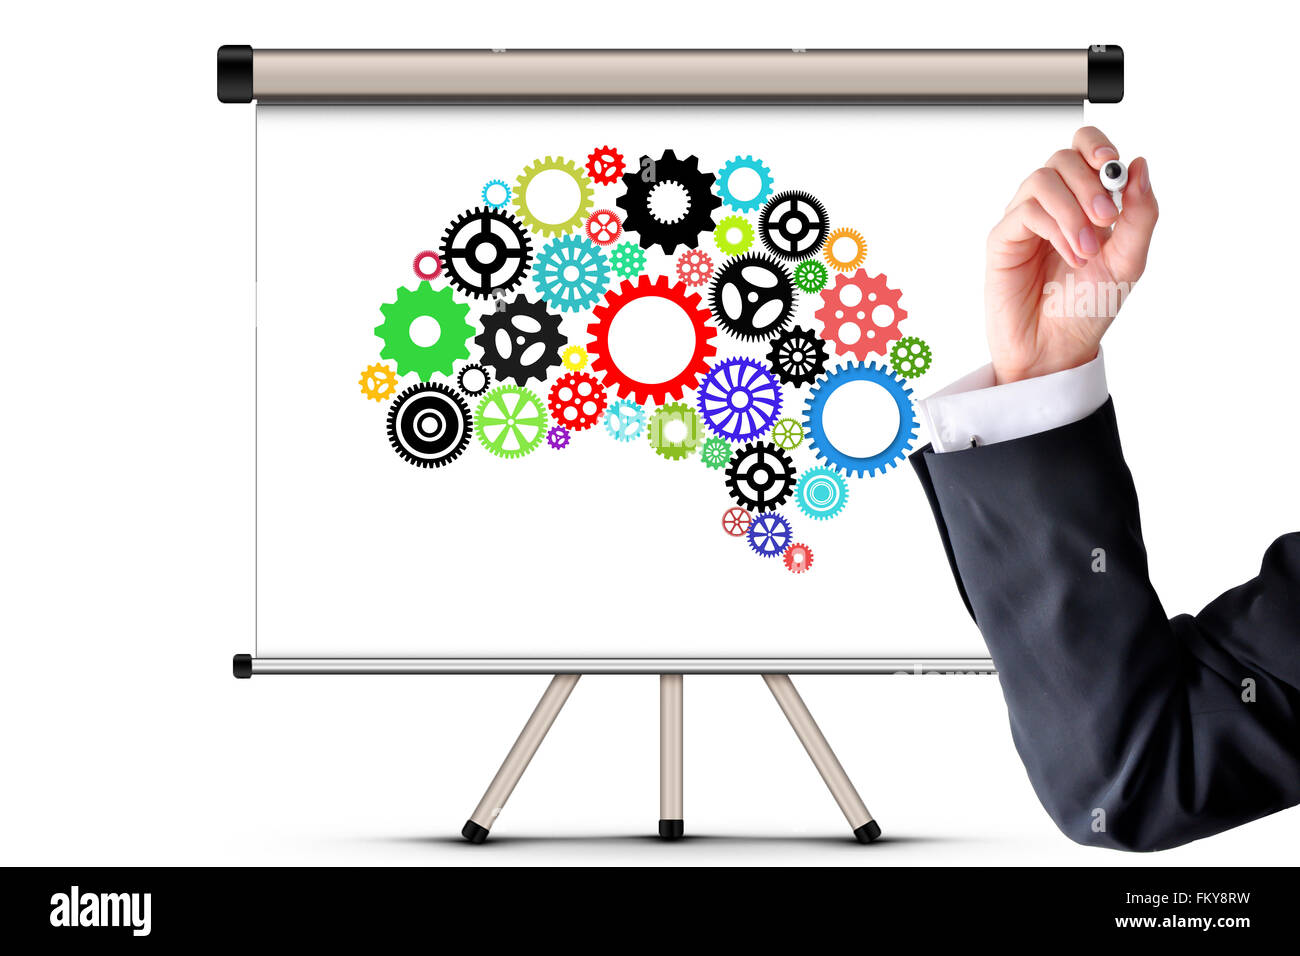 Know how concept with Human brain shape and gears draw on office chalkboard Stock Photo